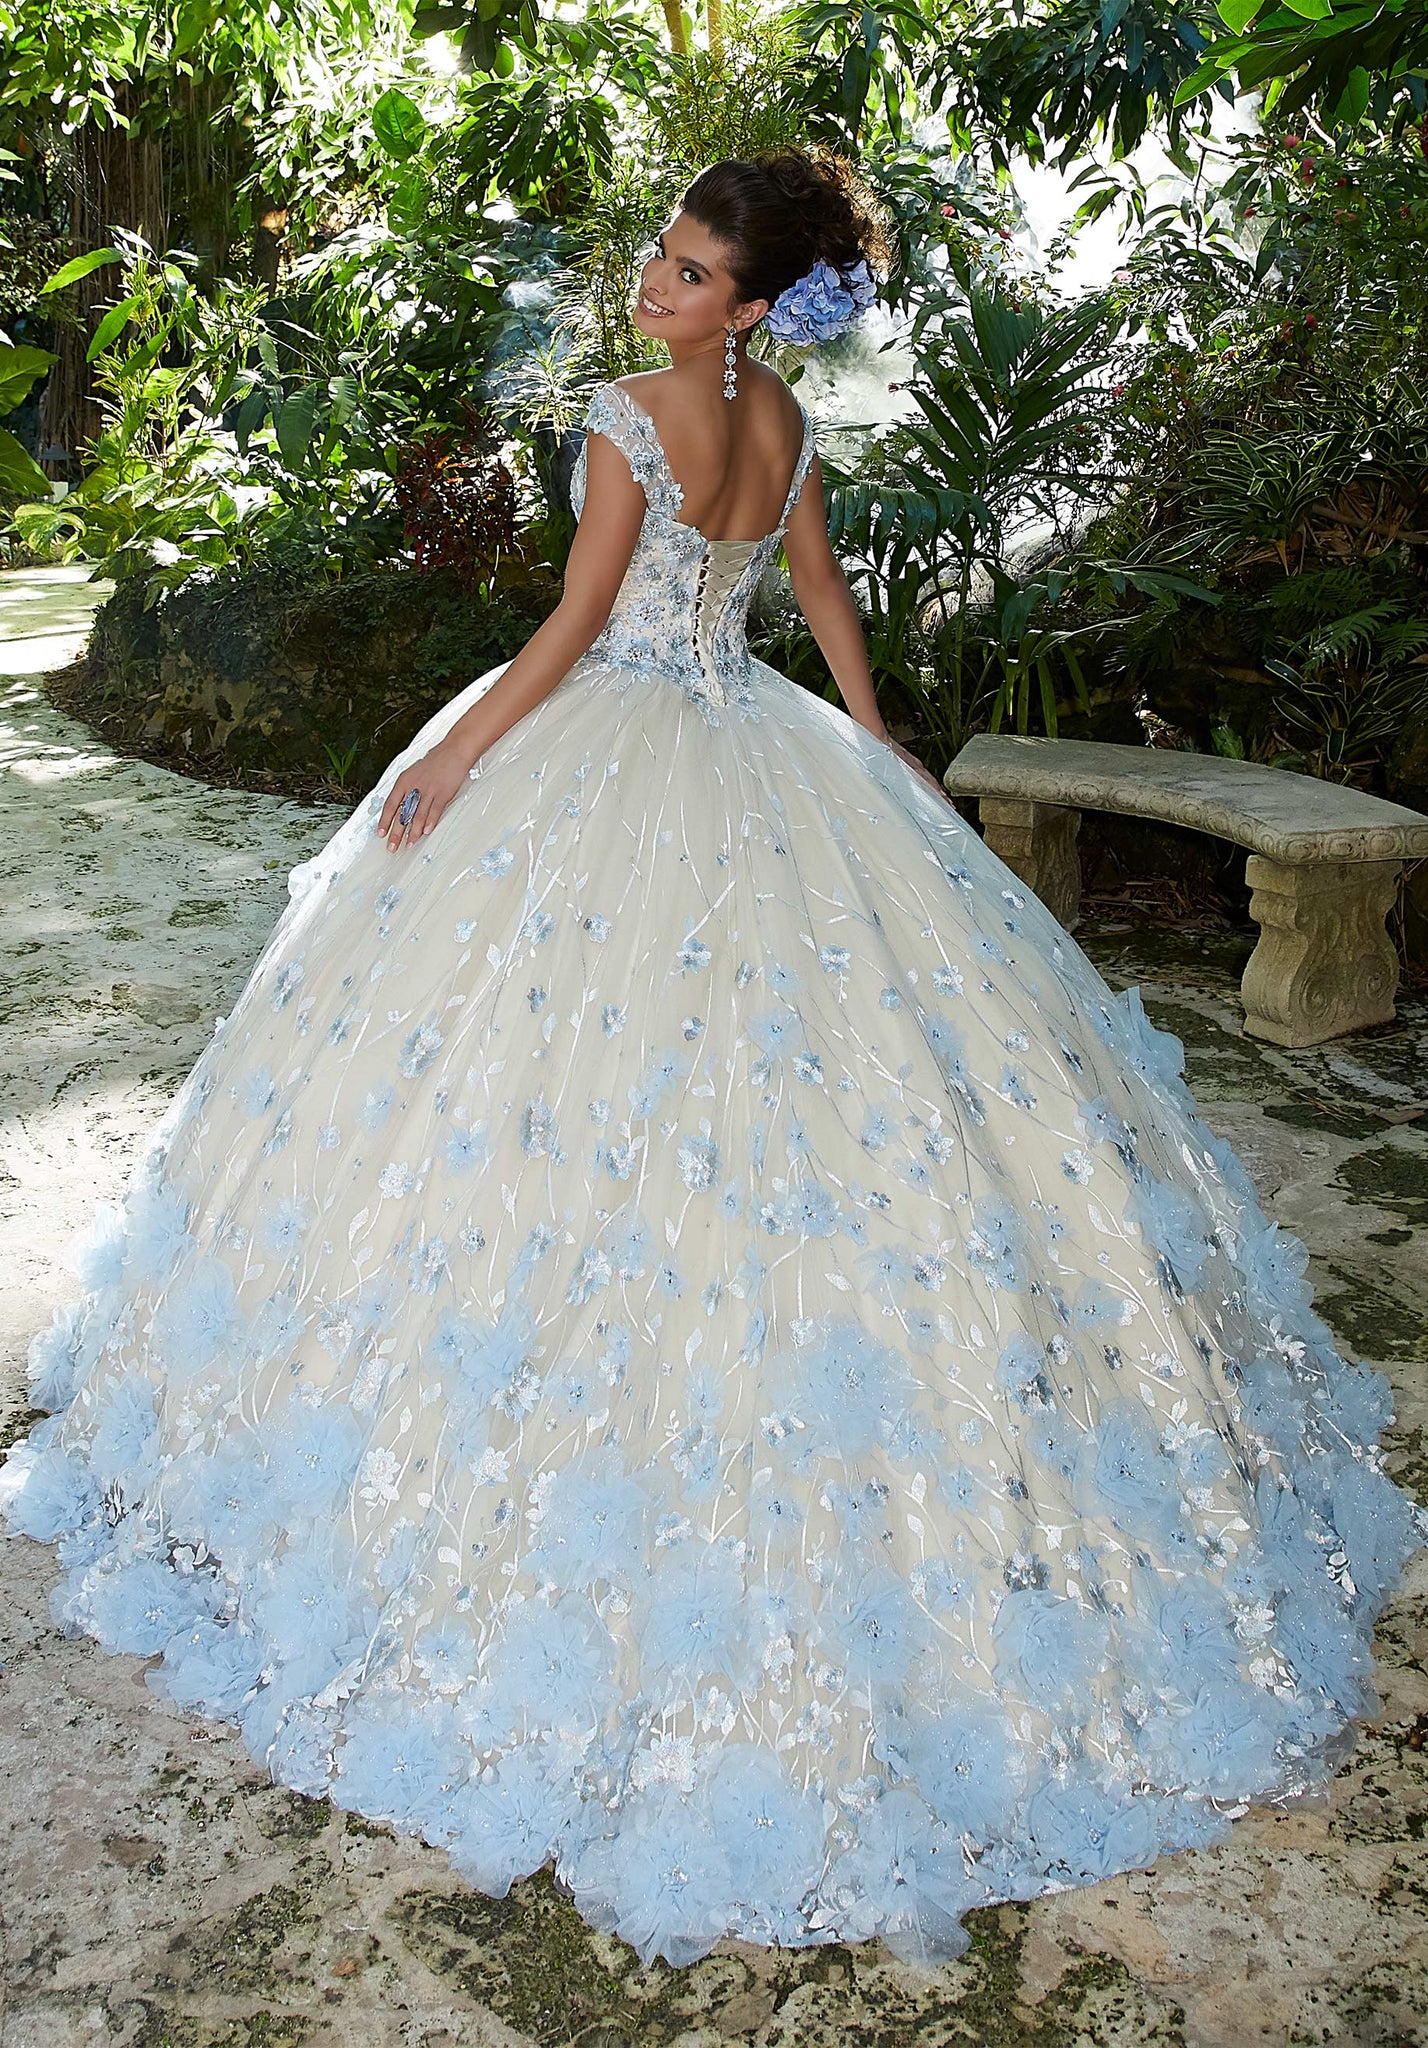 Crystal Beaded, Allover Floral Embroidered Pattern on a Tulle Ballgown